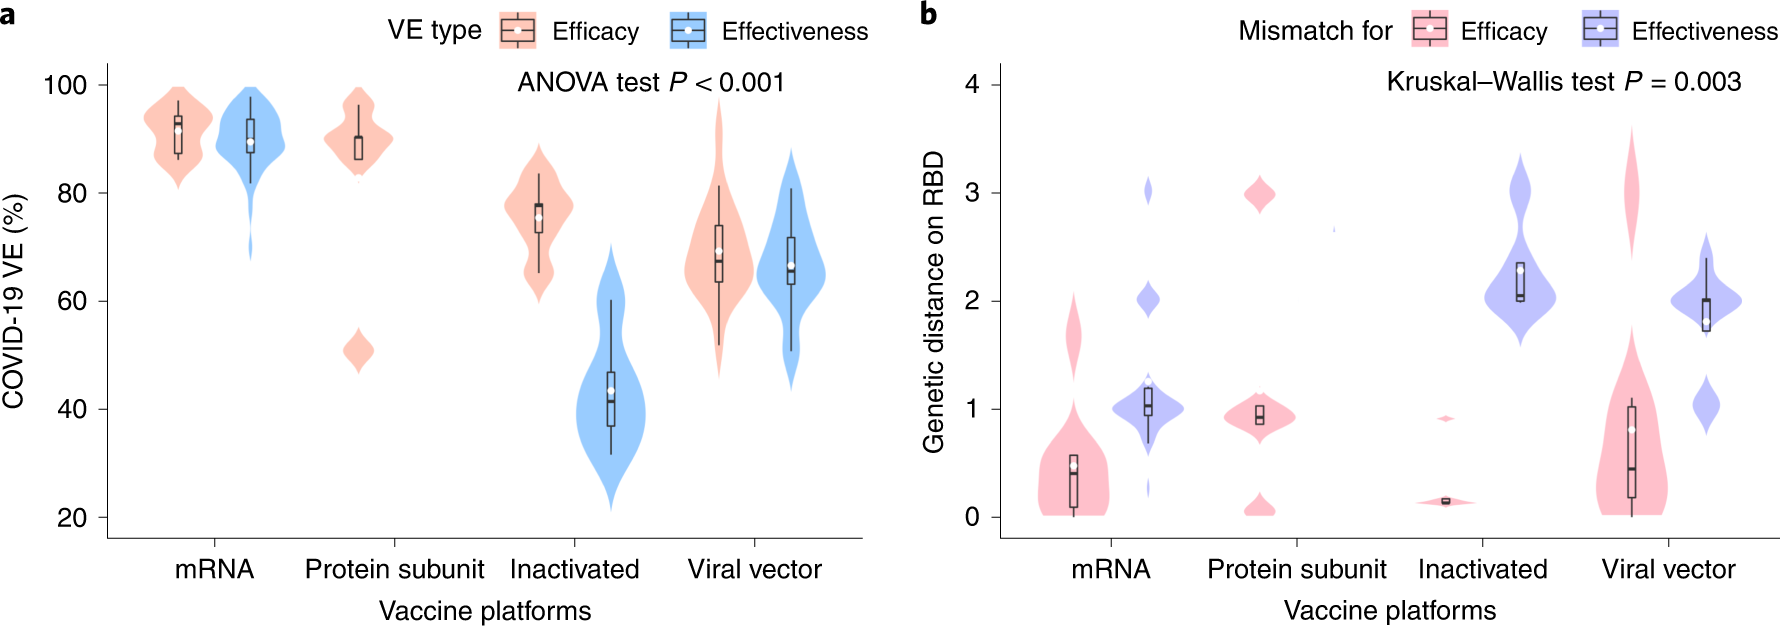 a, Distribution of the VE estimates for different platforms. The VE of mRNA and protein subunit vaccines are higher than other vaccines (two-sided ANOVA test P = 2.2 × 10−14, n = 78). b, Distribution of genetic mismatch on RBD for different vaccine technologies. Genetic mismatch is the lowest for mRNA vaccines (two-sided Kruskal–Walls test P = 0.003, n = 78). In the box plots, the middle bar indicates the median; the white dot indicates the mean; and the boundaries are Q1 and Q3. Whiskers of the box plot are extended to Q3 + 1.5× interquartile range (IQR) and Q1 − 1.5× IQR.